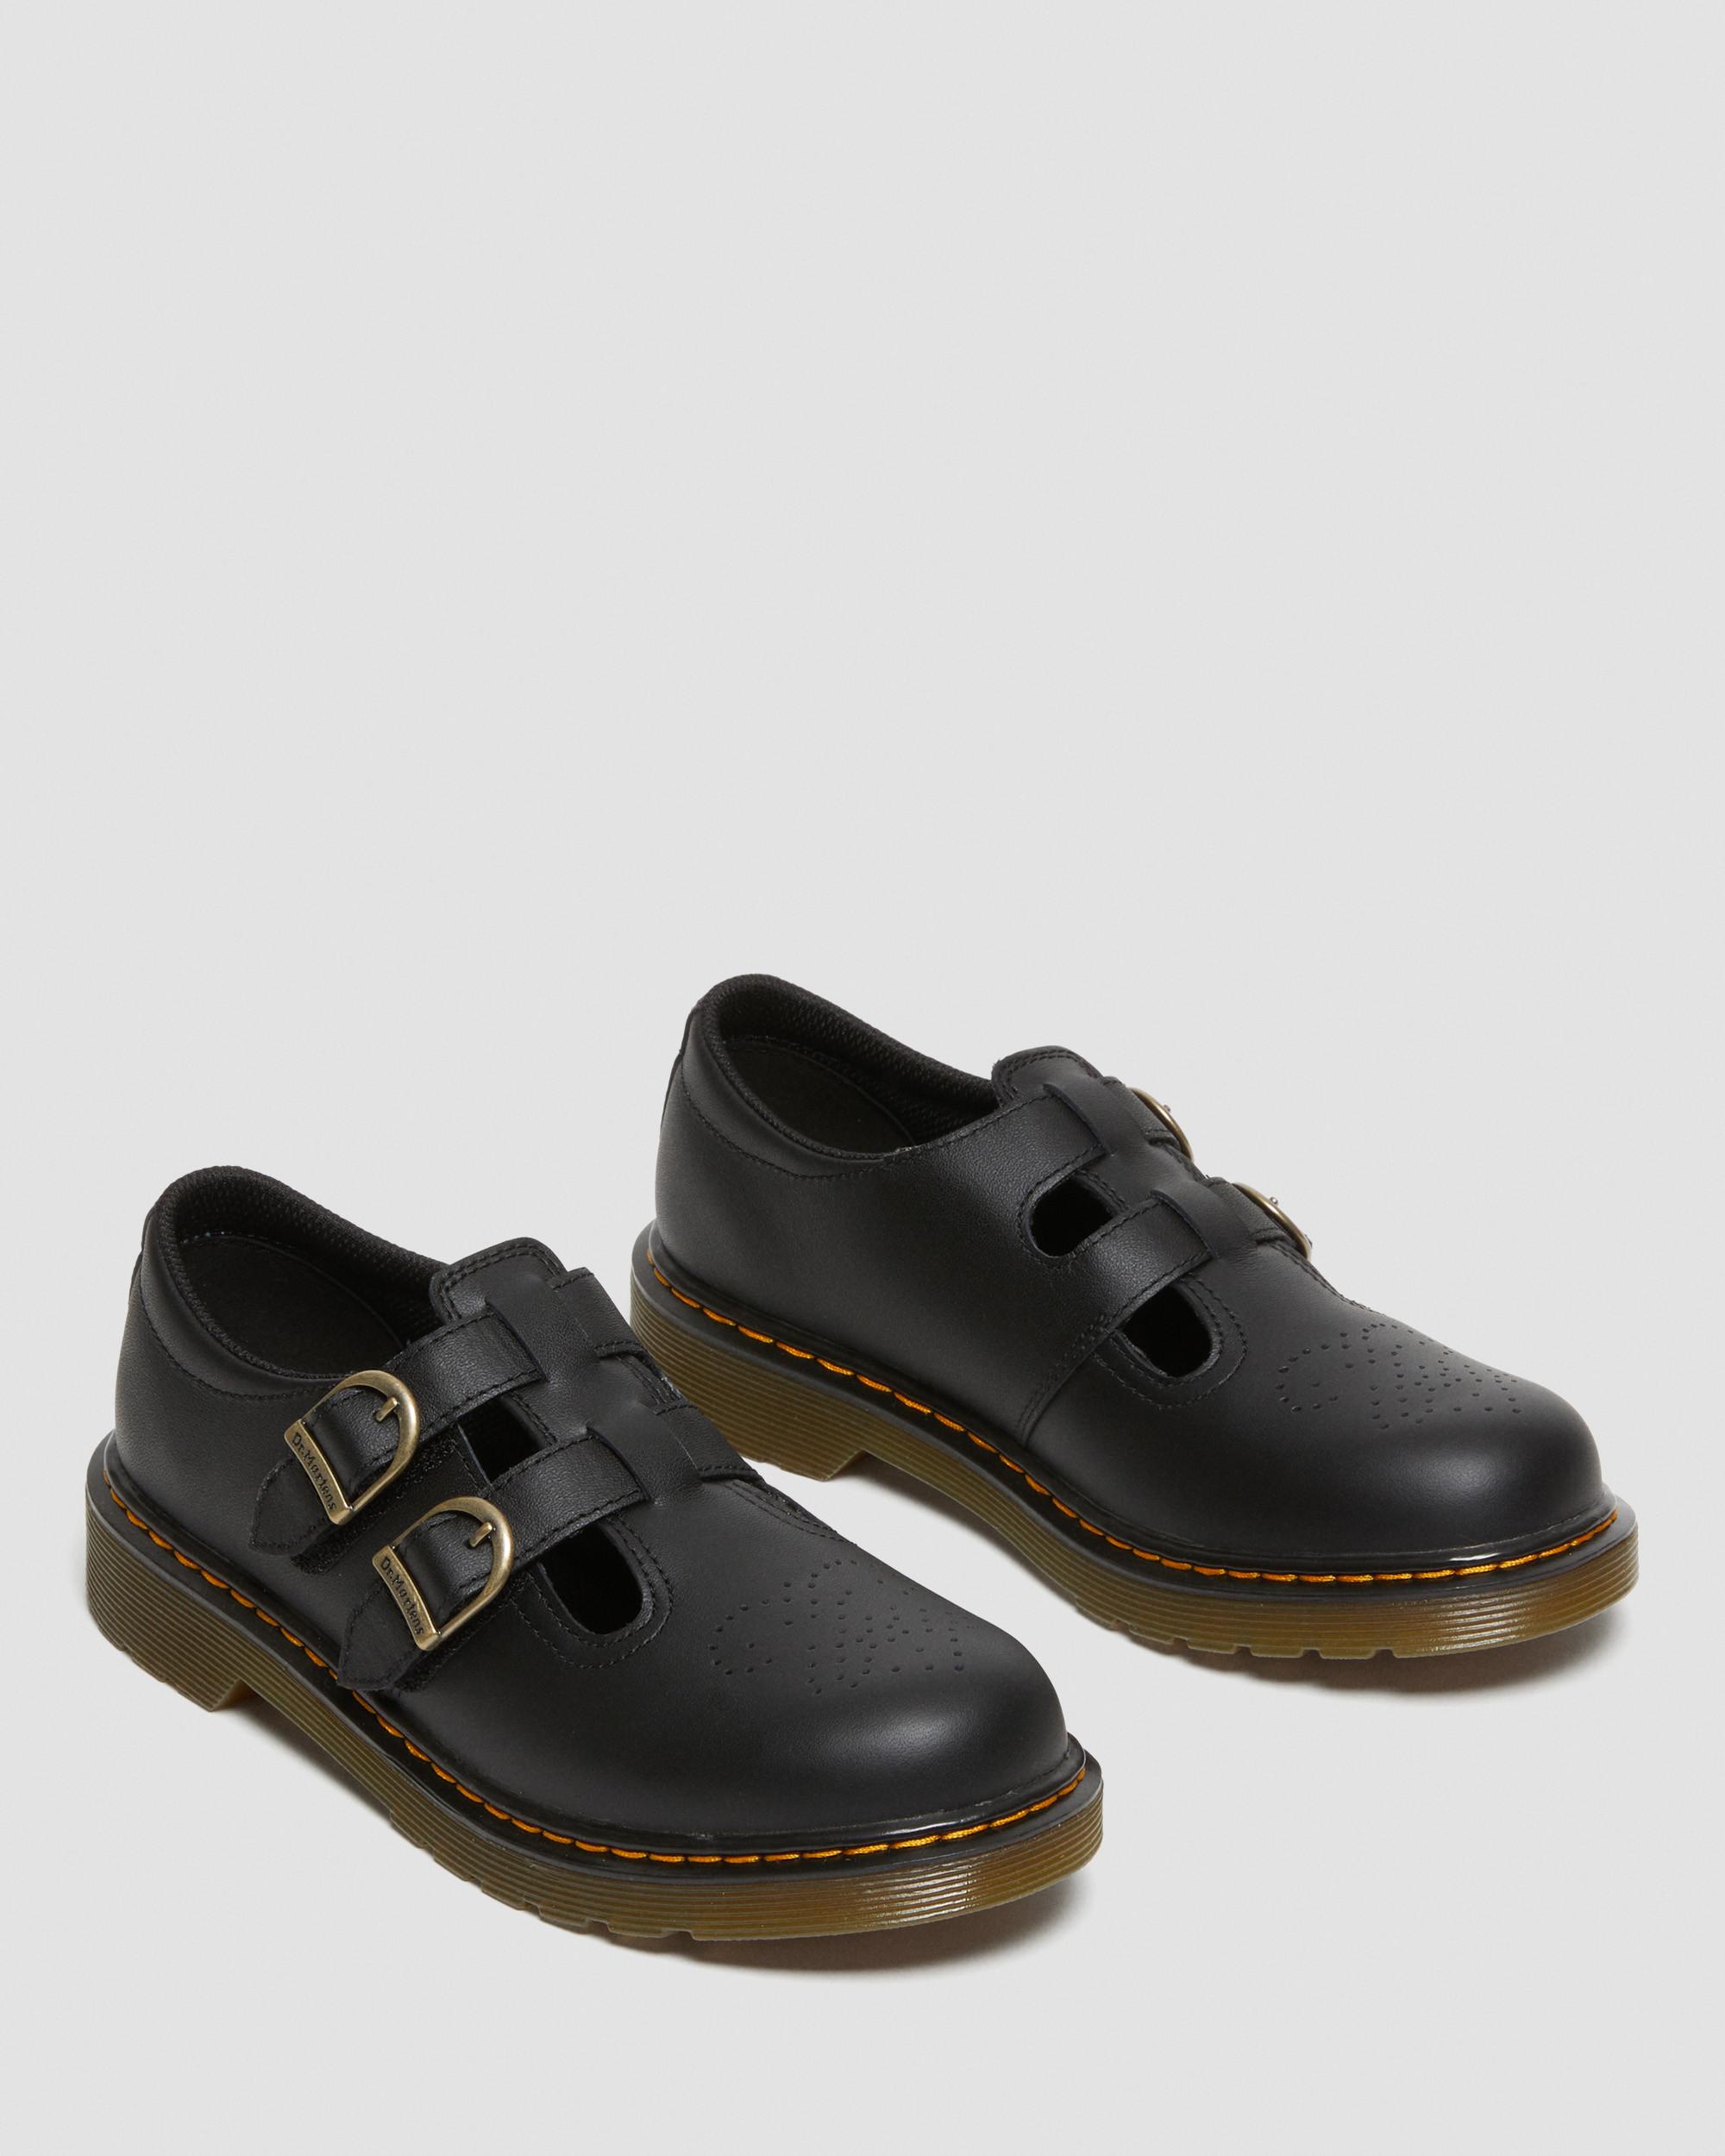 Youth 8065 Softy T Leather Mary Jane Shoes in Black